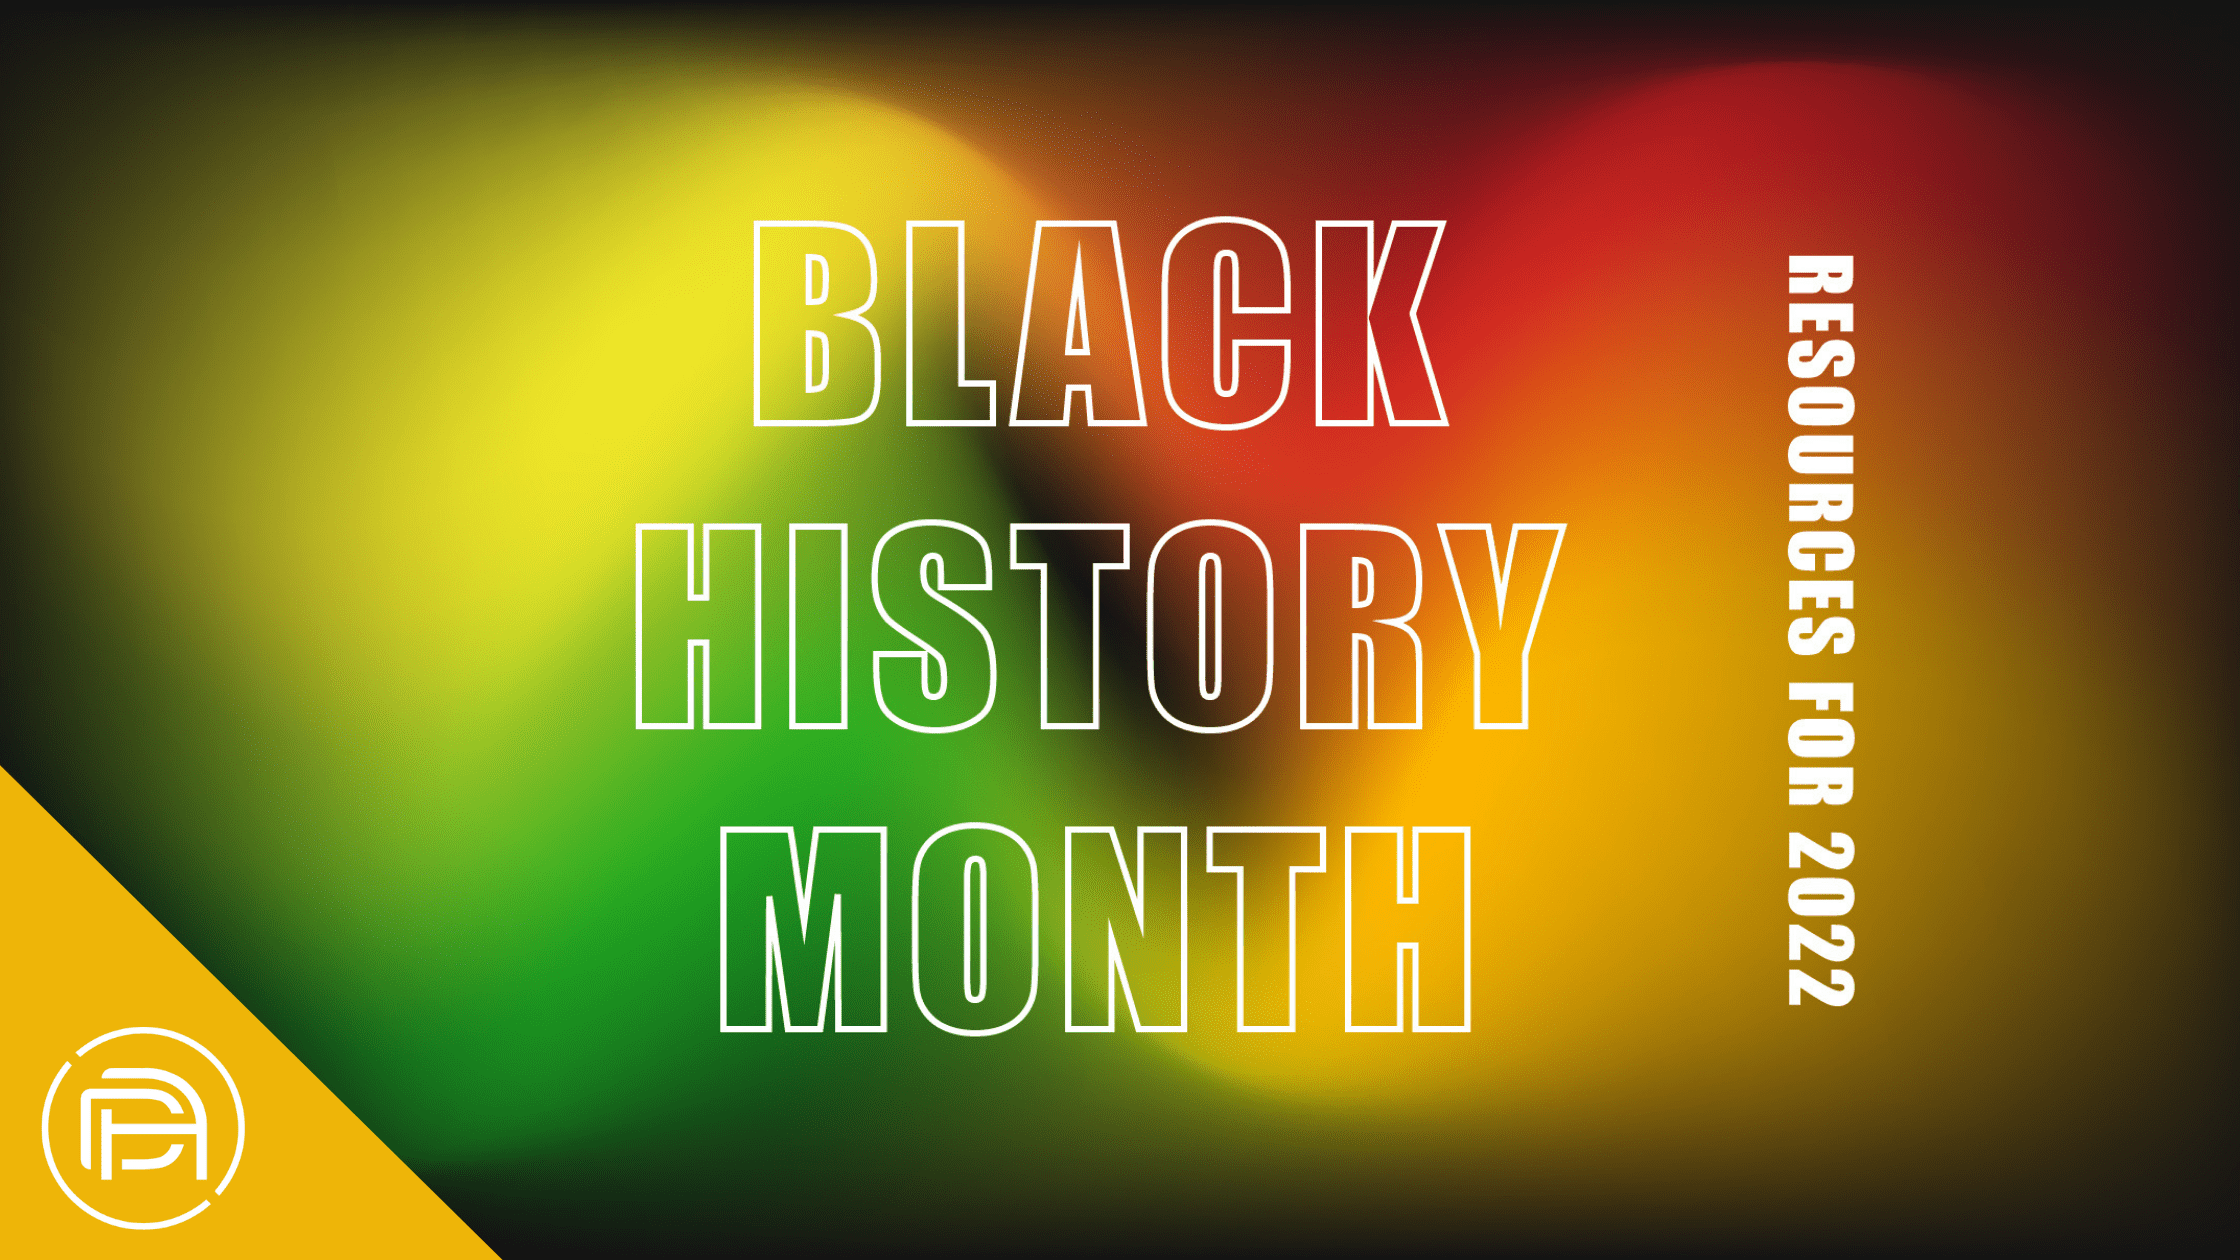 Honoring Black History Month: Resources For 2022